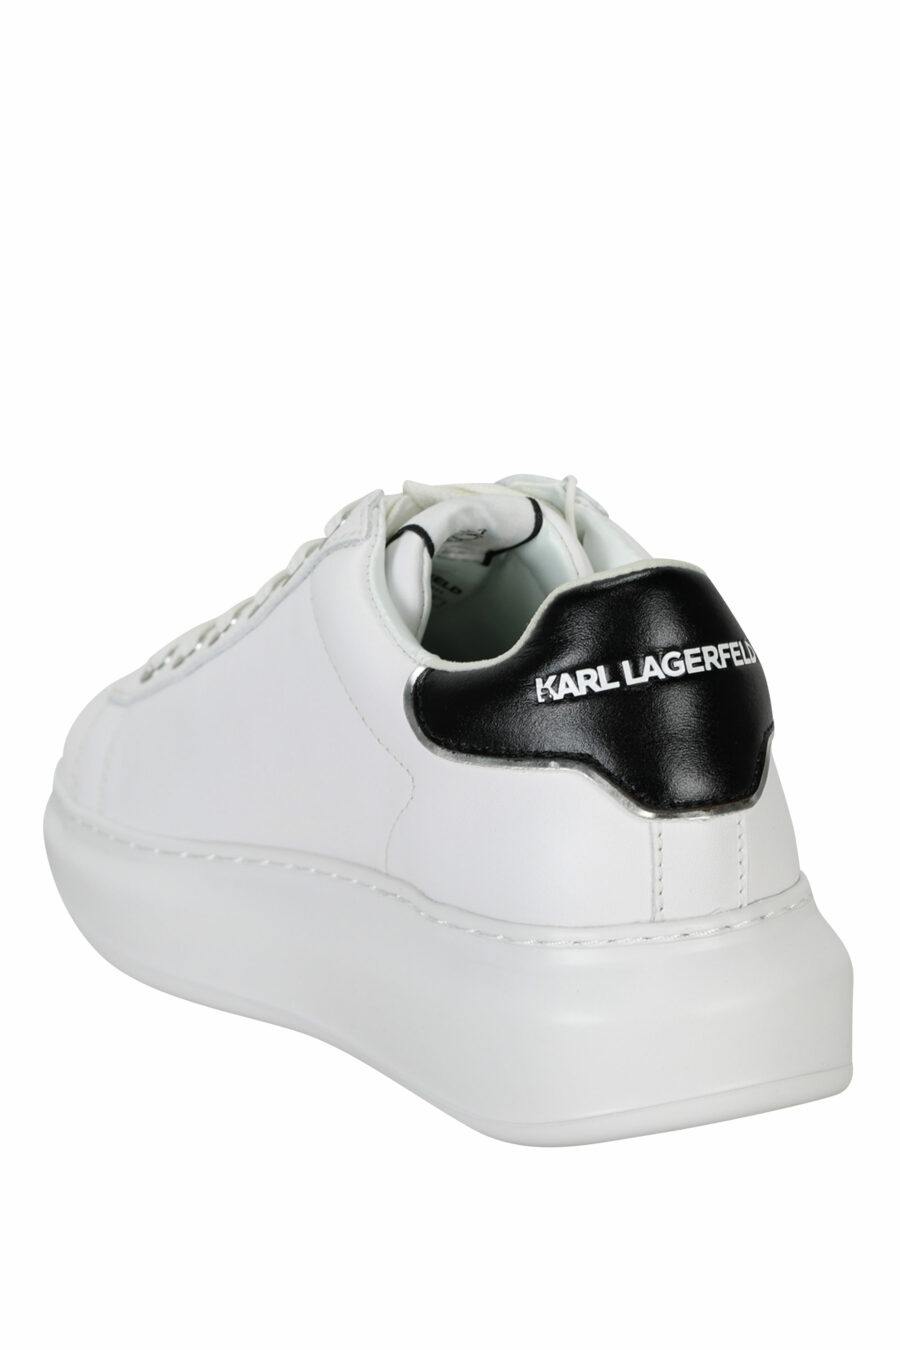 White "Kapri" trainers with rubber logo and black detail - 5059529351020 3